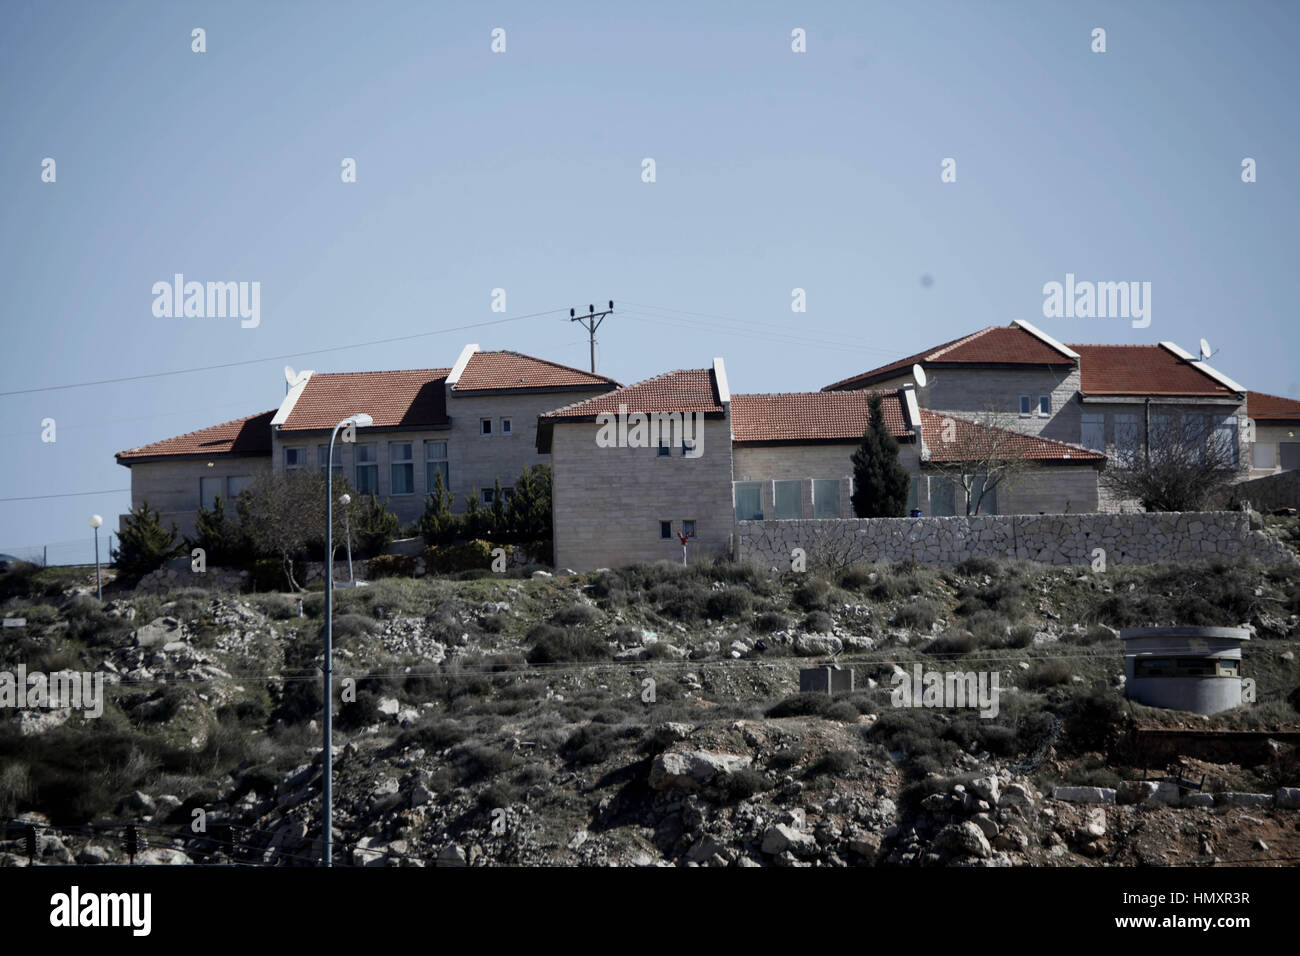 Hebron. 7th Feb, 2017. A picture shows a view of the Hagai Jewish settlement on the outskirts of the West Bank city of Hebron on Feb. 7, 2017. Israel's parliament passed Monday a controversial law to retroactively legalize wildcat Jewish outposts built on private Palestinian lands, despite international condemnations and warnings that the law is unconstitutional. Credit: Mamoun Wazwaz/Xinhua/Alamy Live News Stock Photo